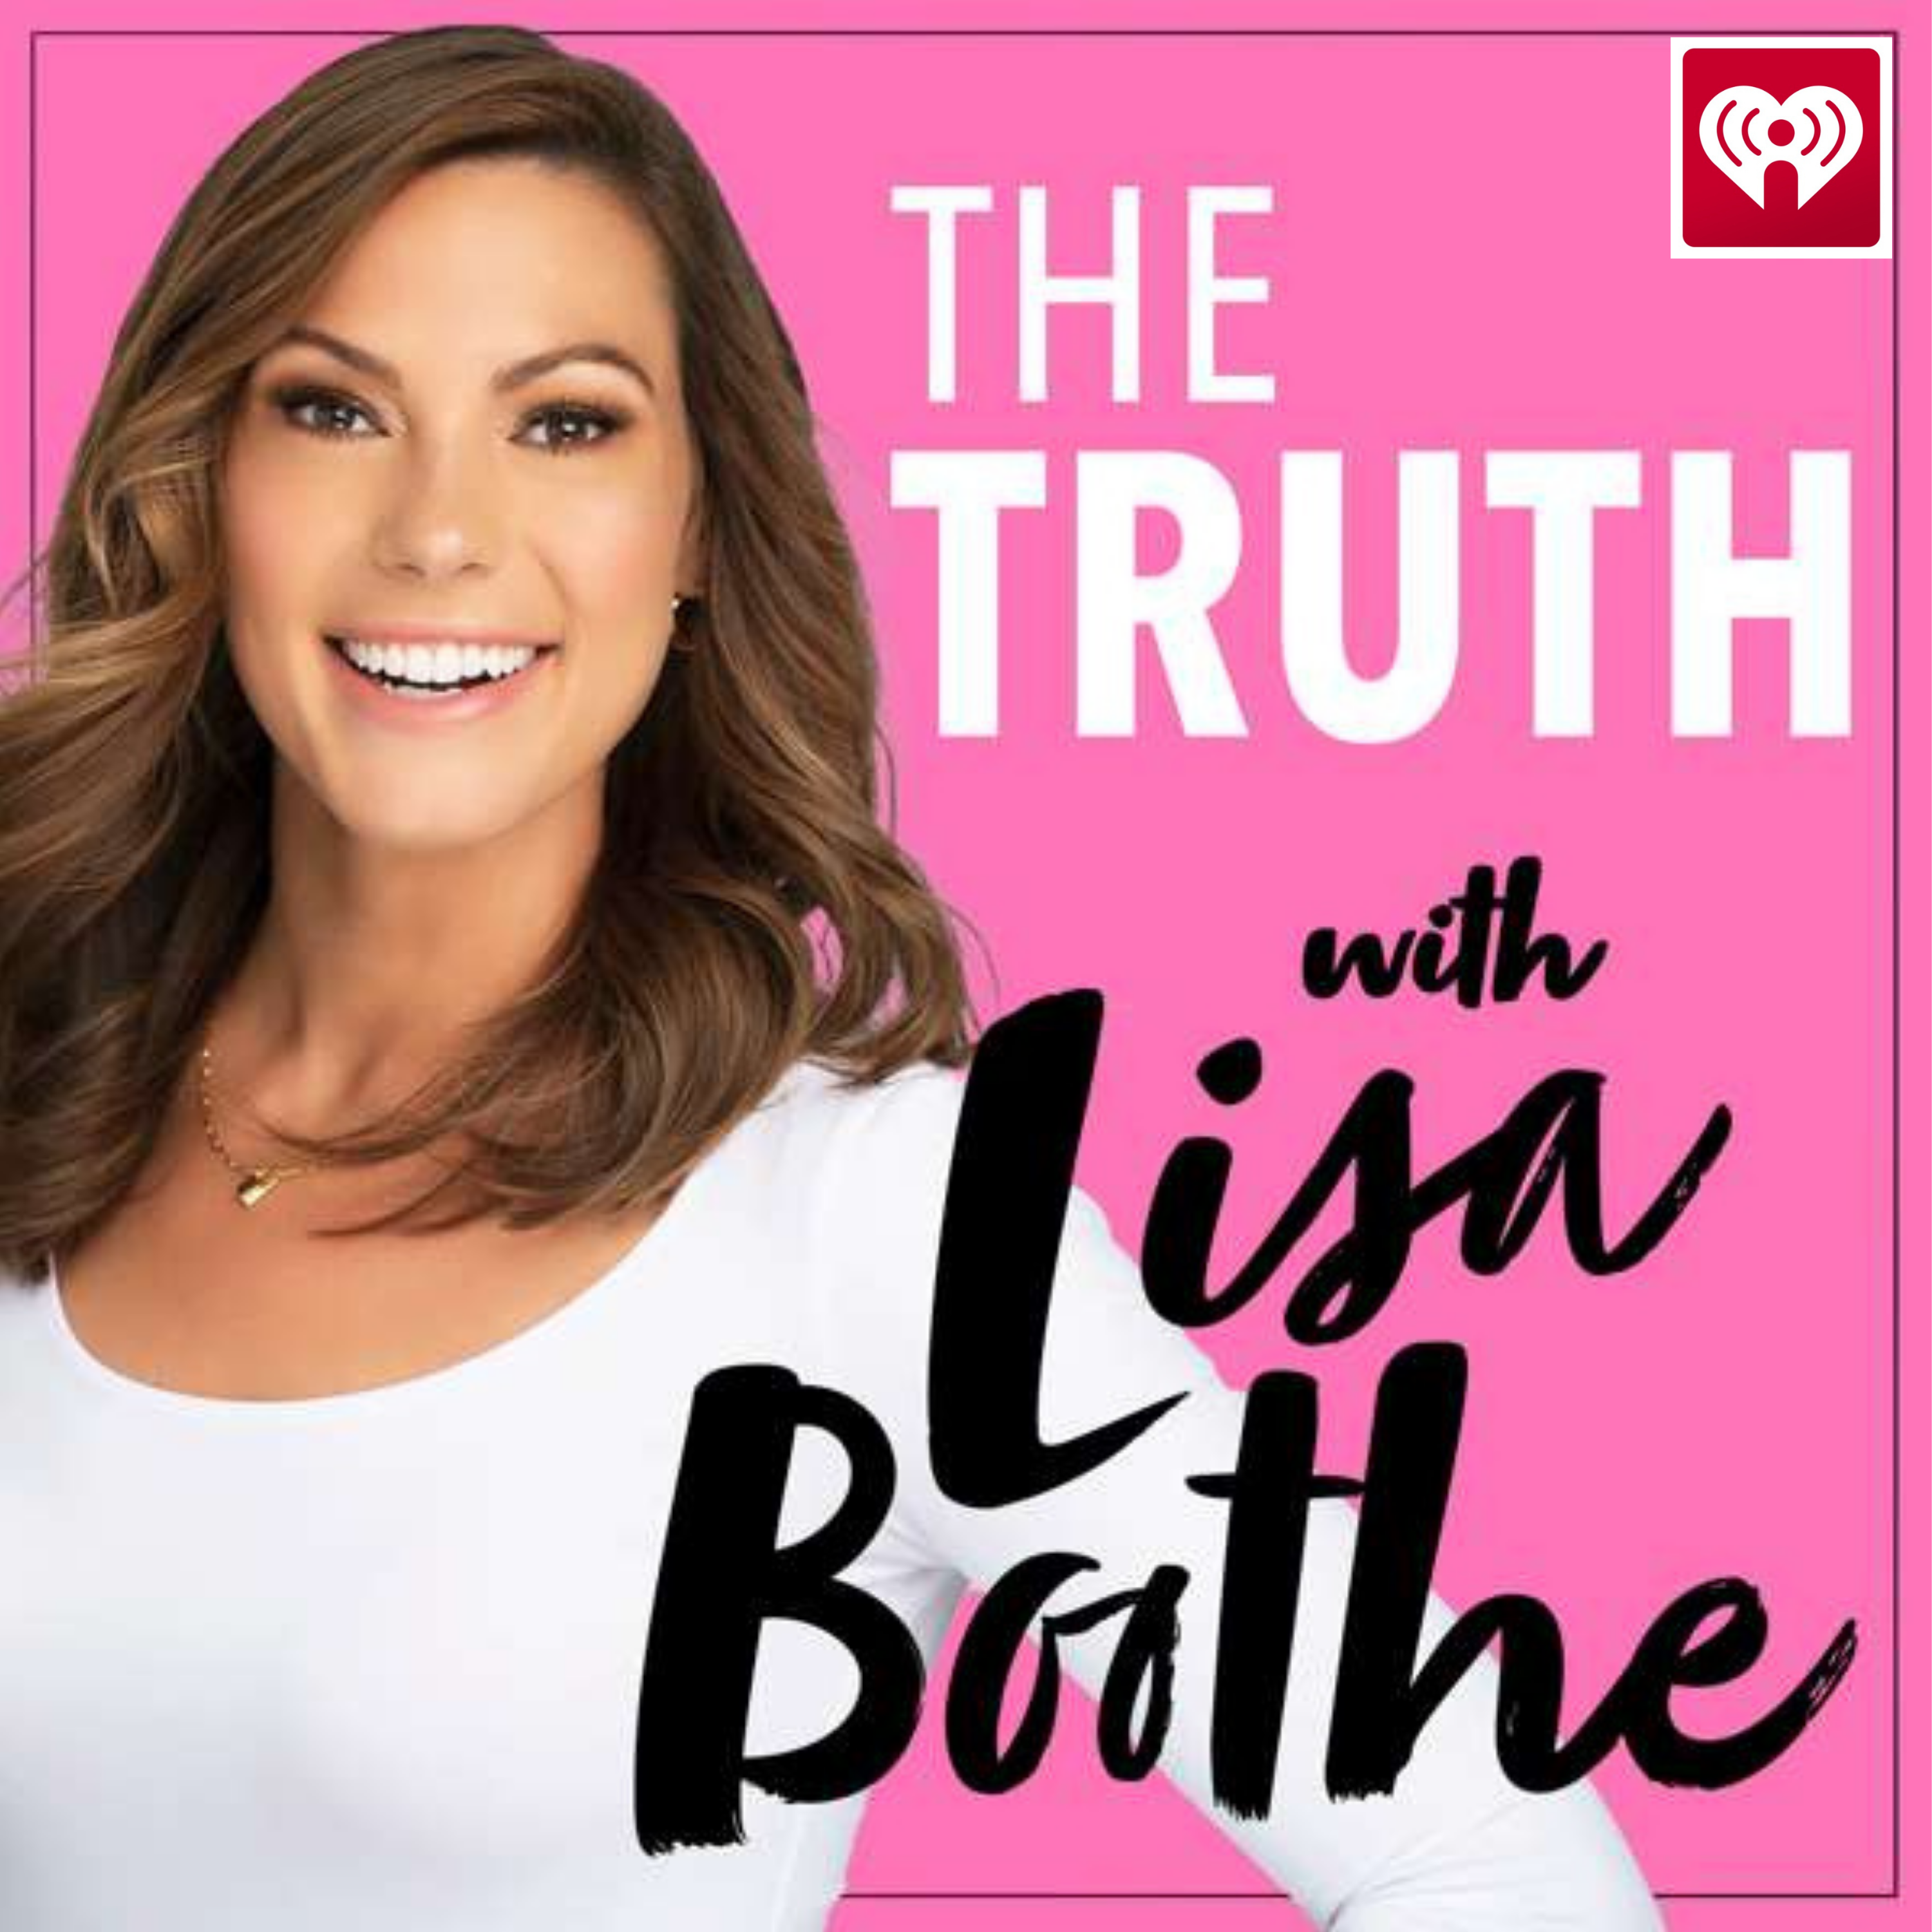 The Truth with Lisa Boothe: The World Economic Forum, Big Tech, and the Erosion of Freedom with Ezra Levant